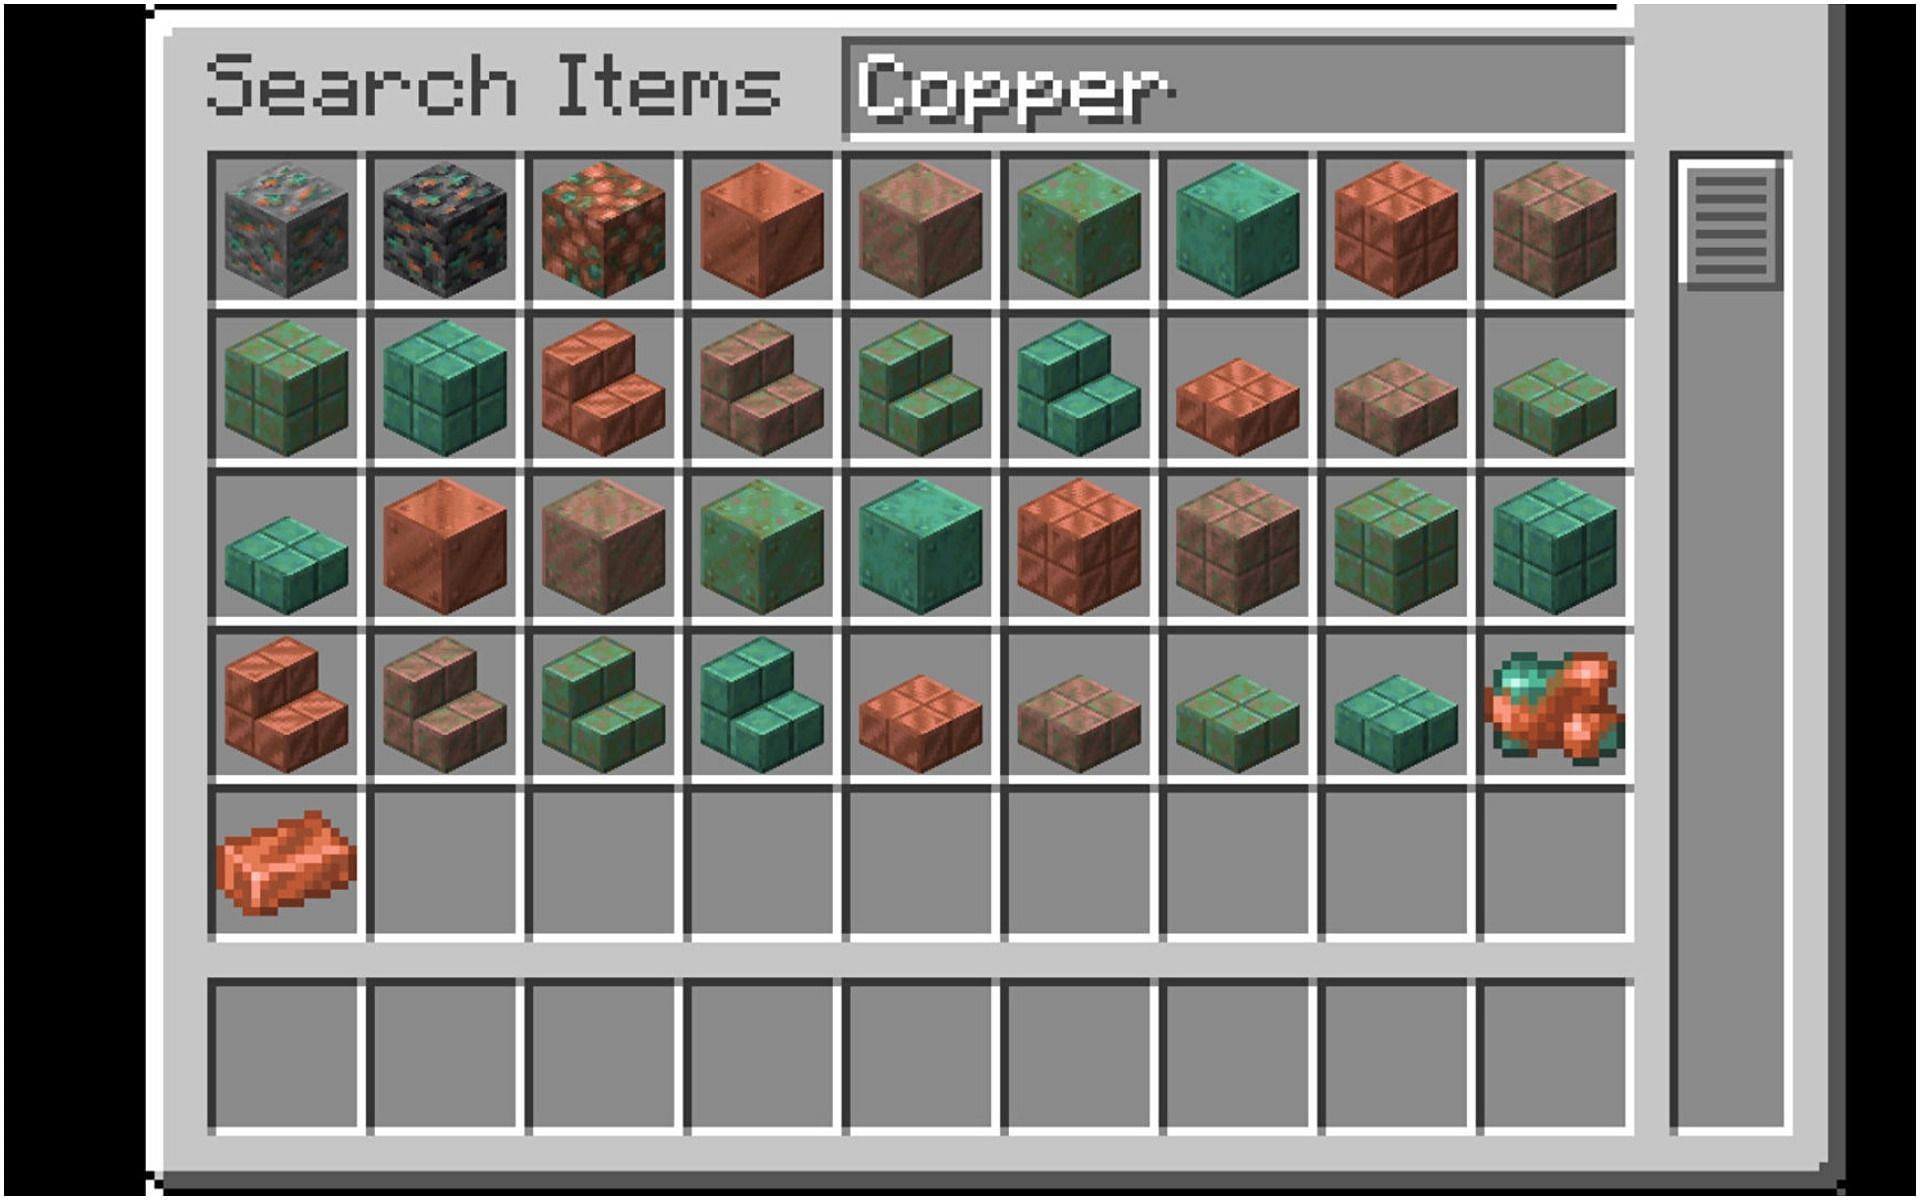 Different variants of copper (Image via Minecraft)